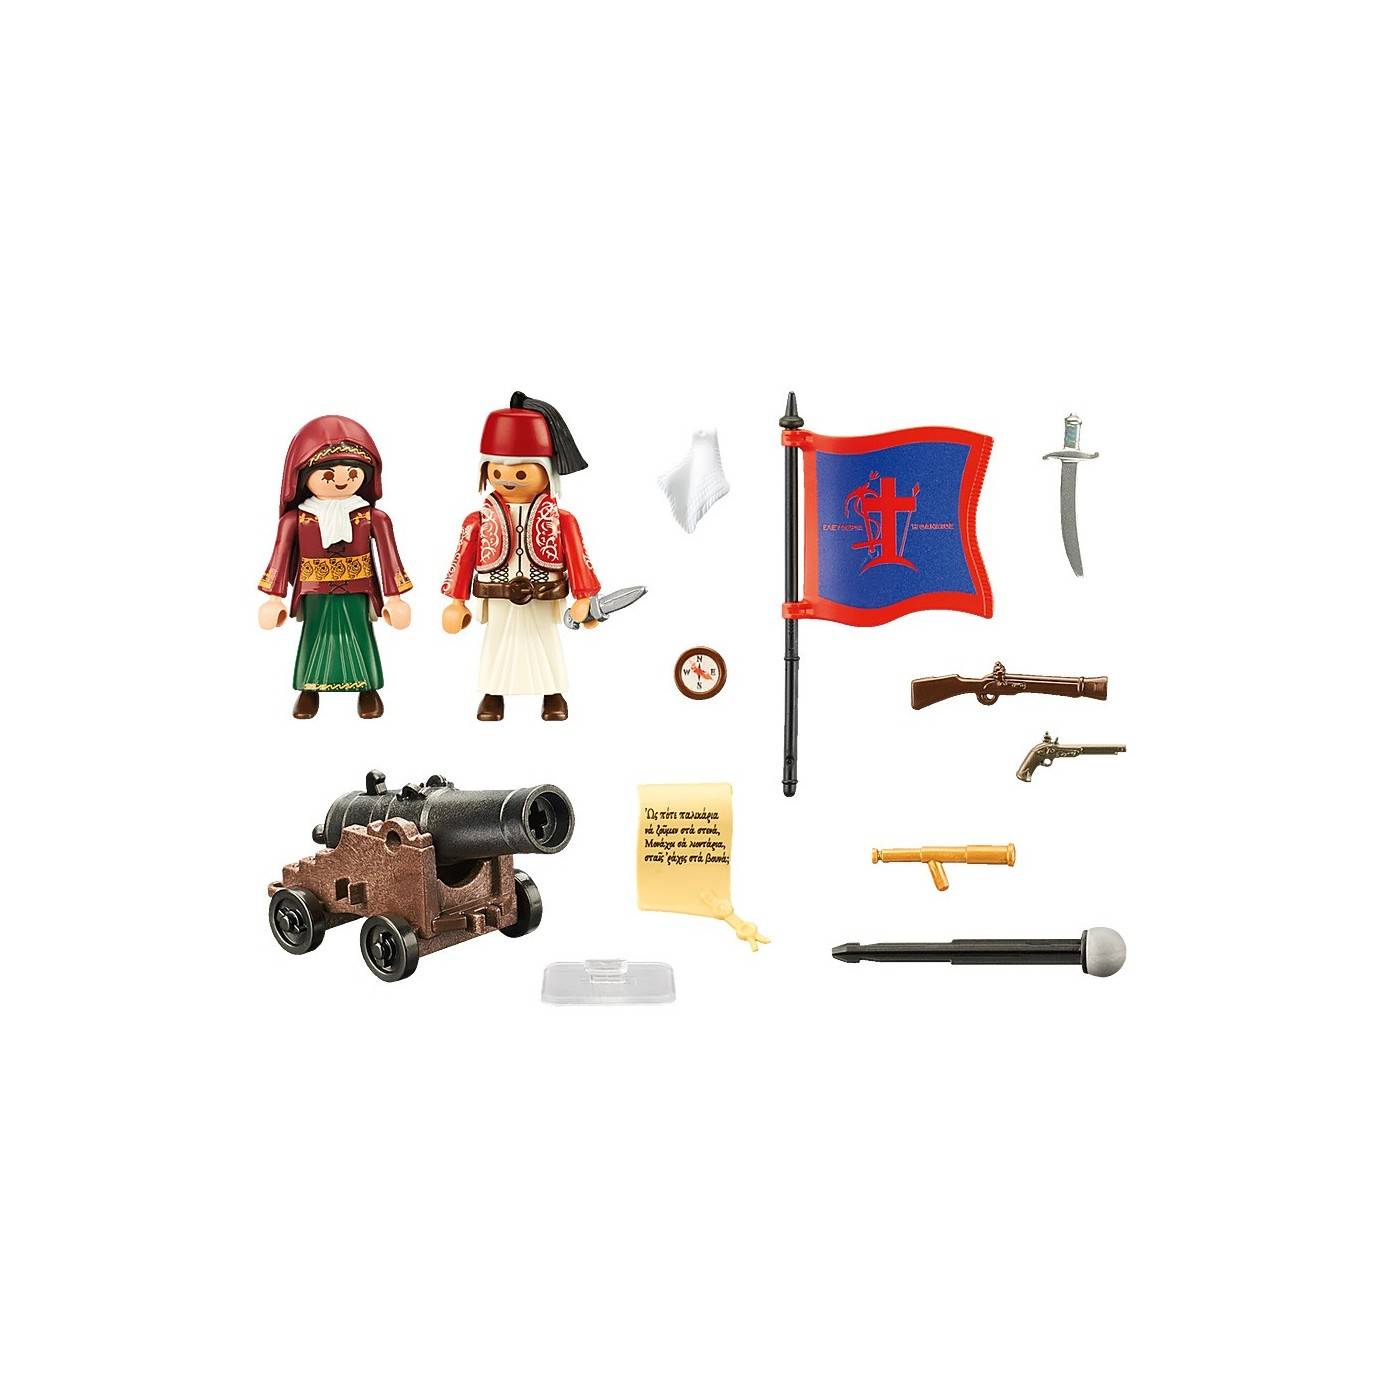 PLAYMOBIL 70761 PLAY AND GIVE HEROES OF 1821